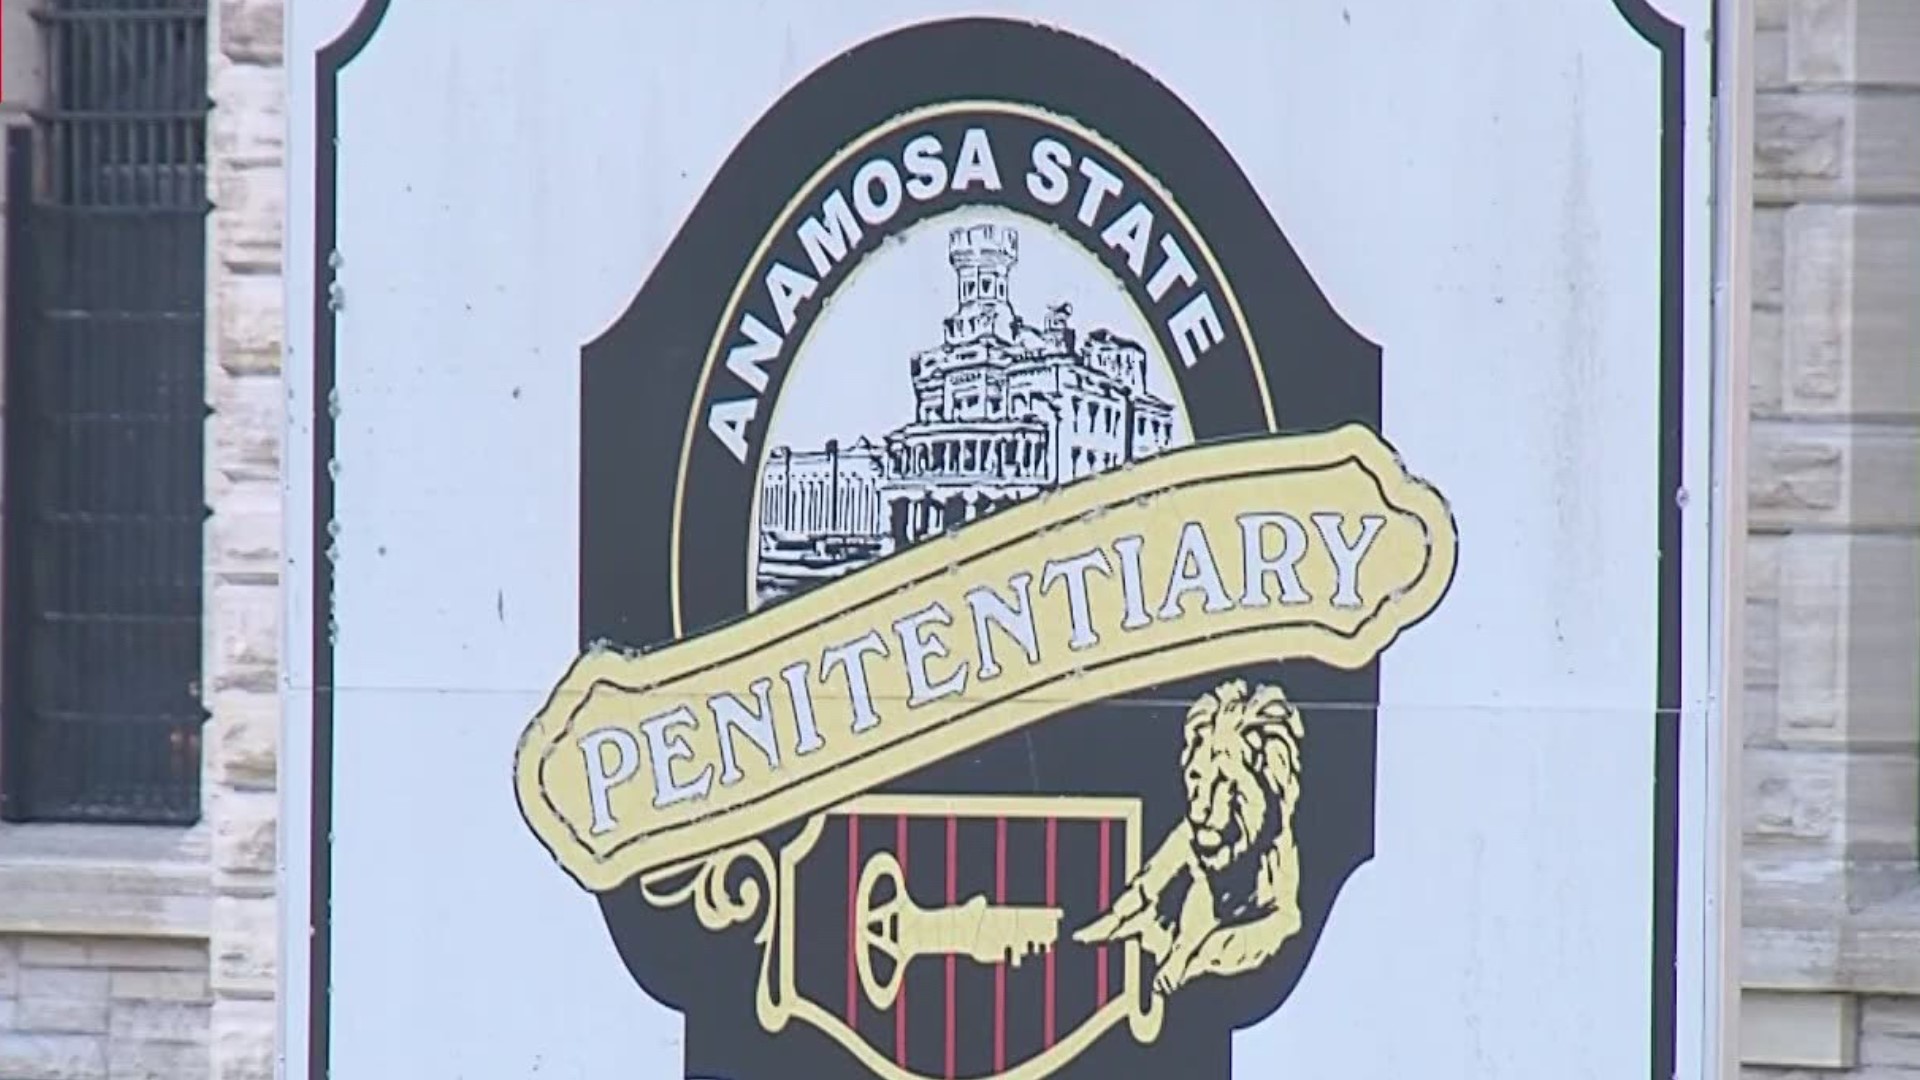 According to the Iowa Department of Corrections, an inmate attacked multiple staff and fellow inmates in the infirmary Tuesday around 10:15 a.m.